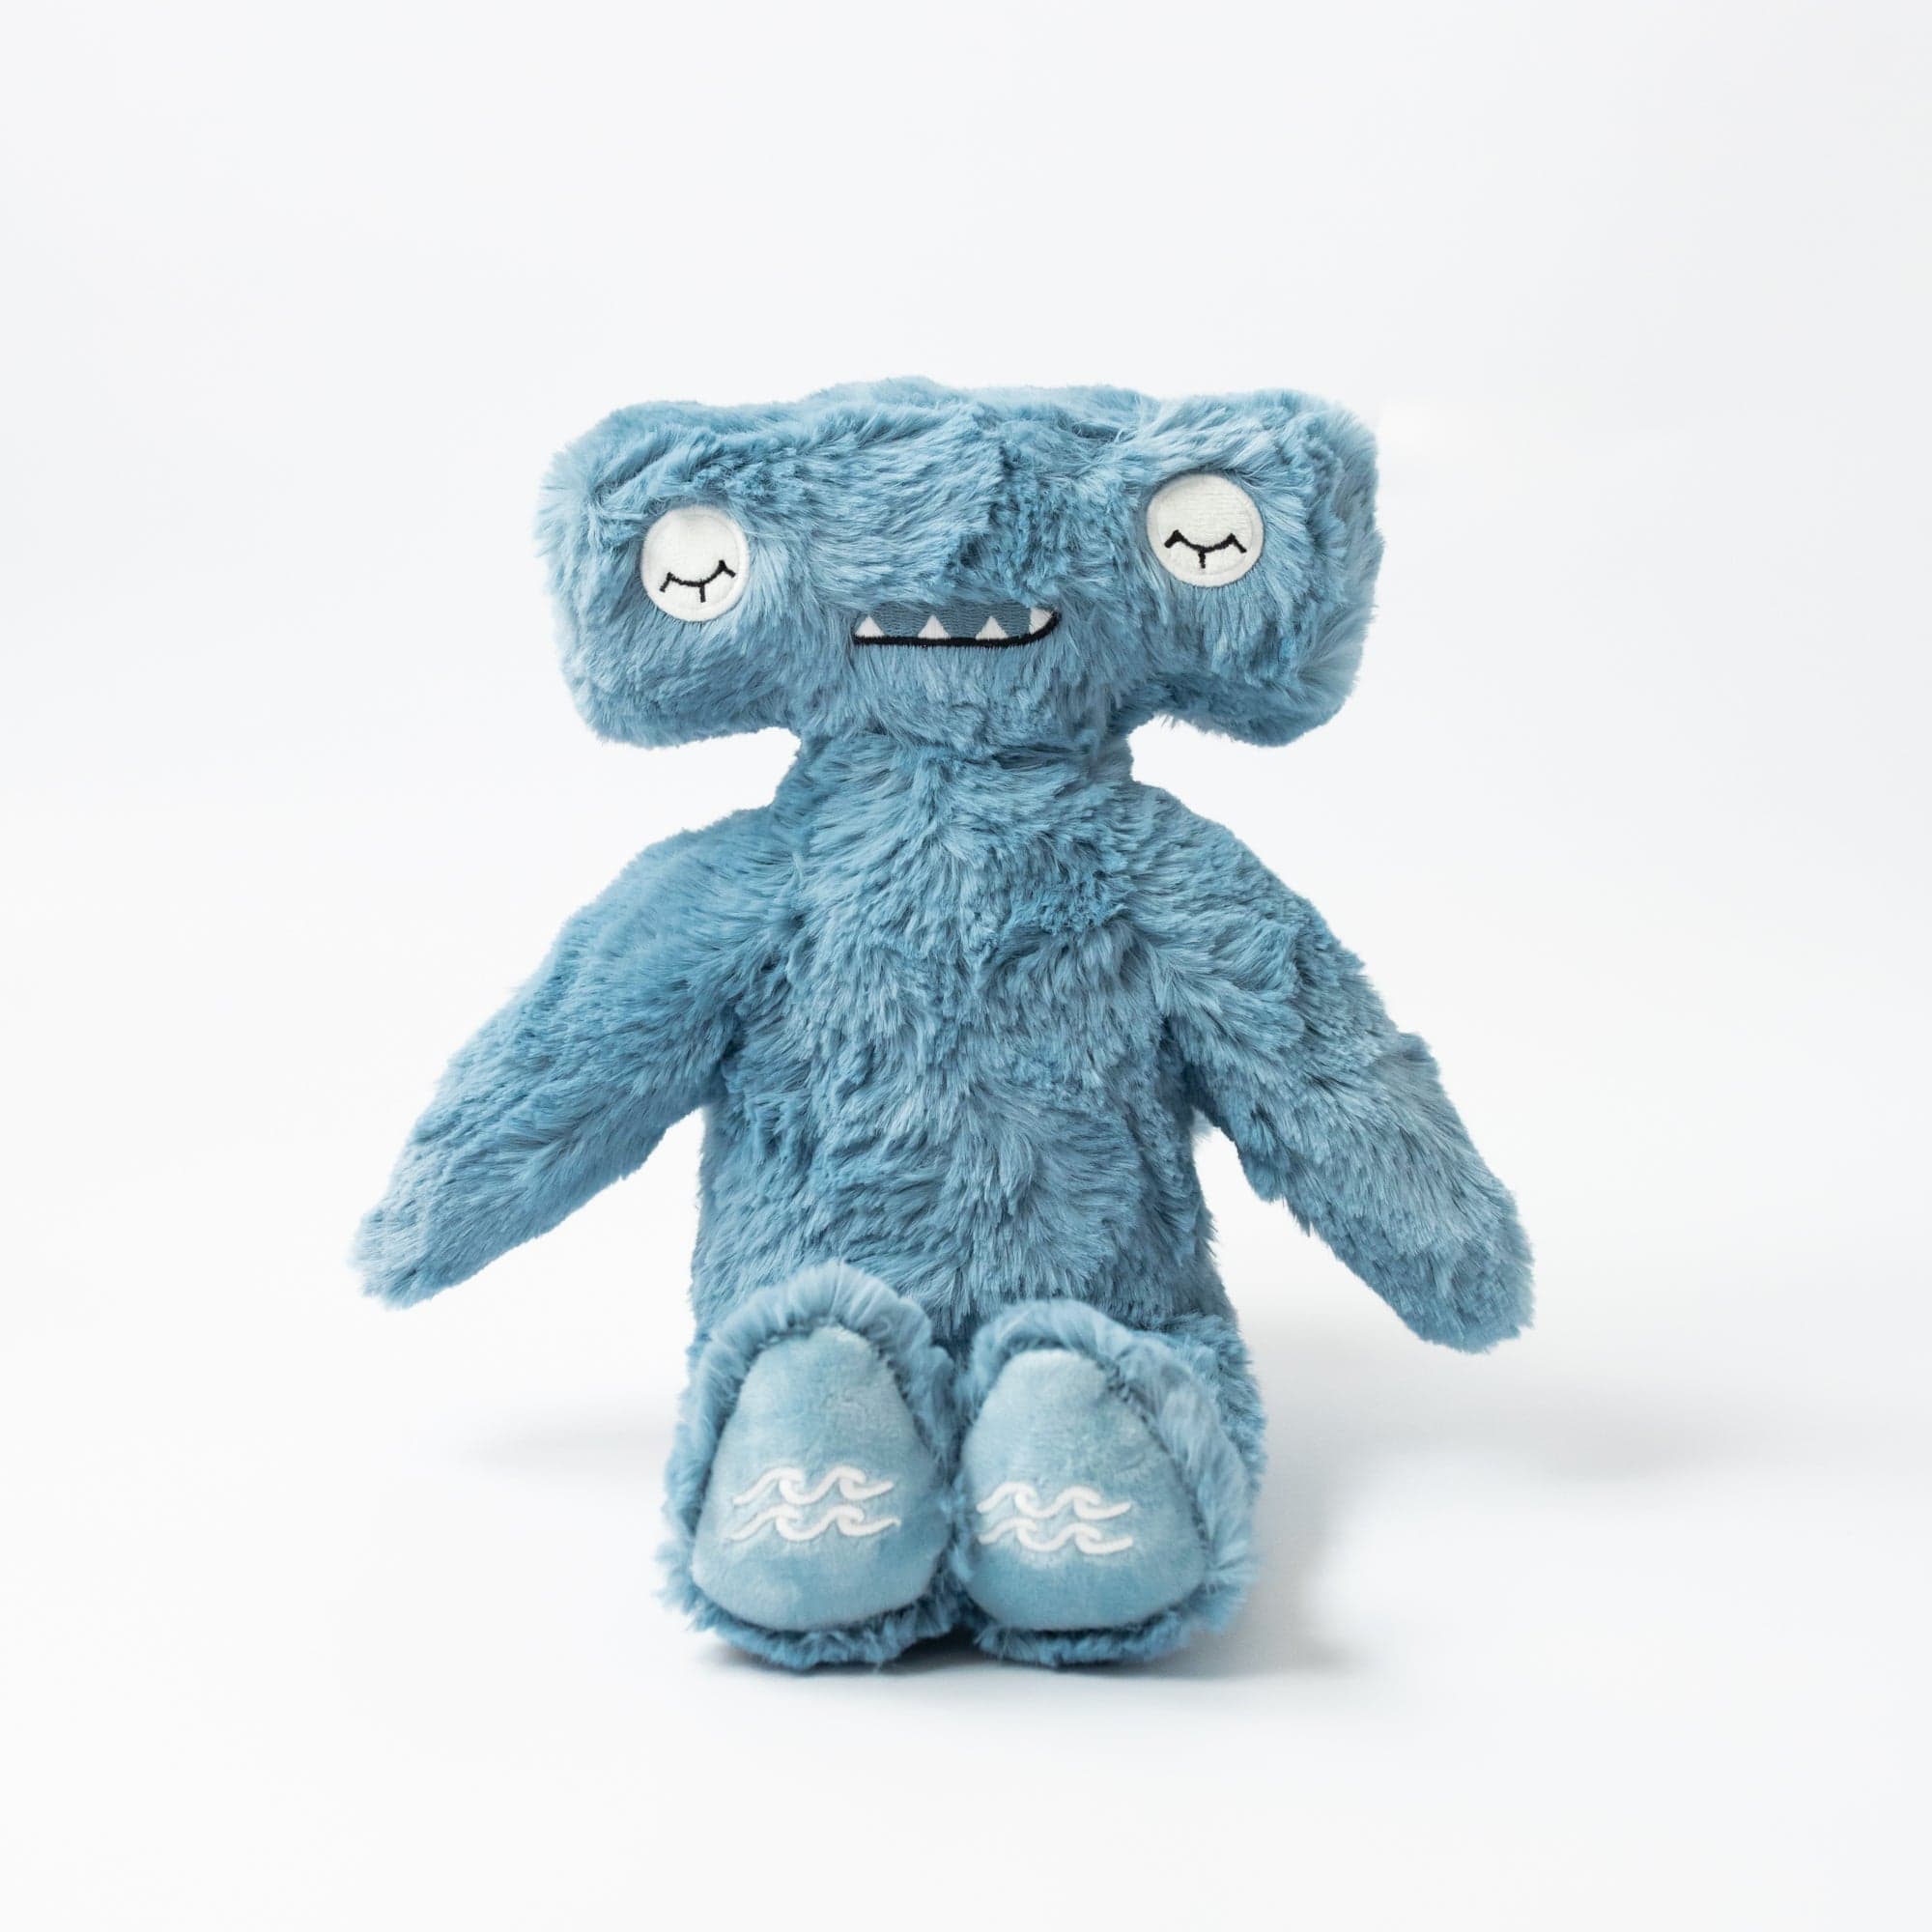 Hammerhead stuffed animal supporting conflict resolution - View Product